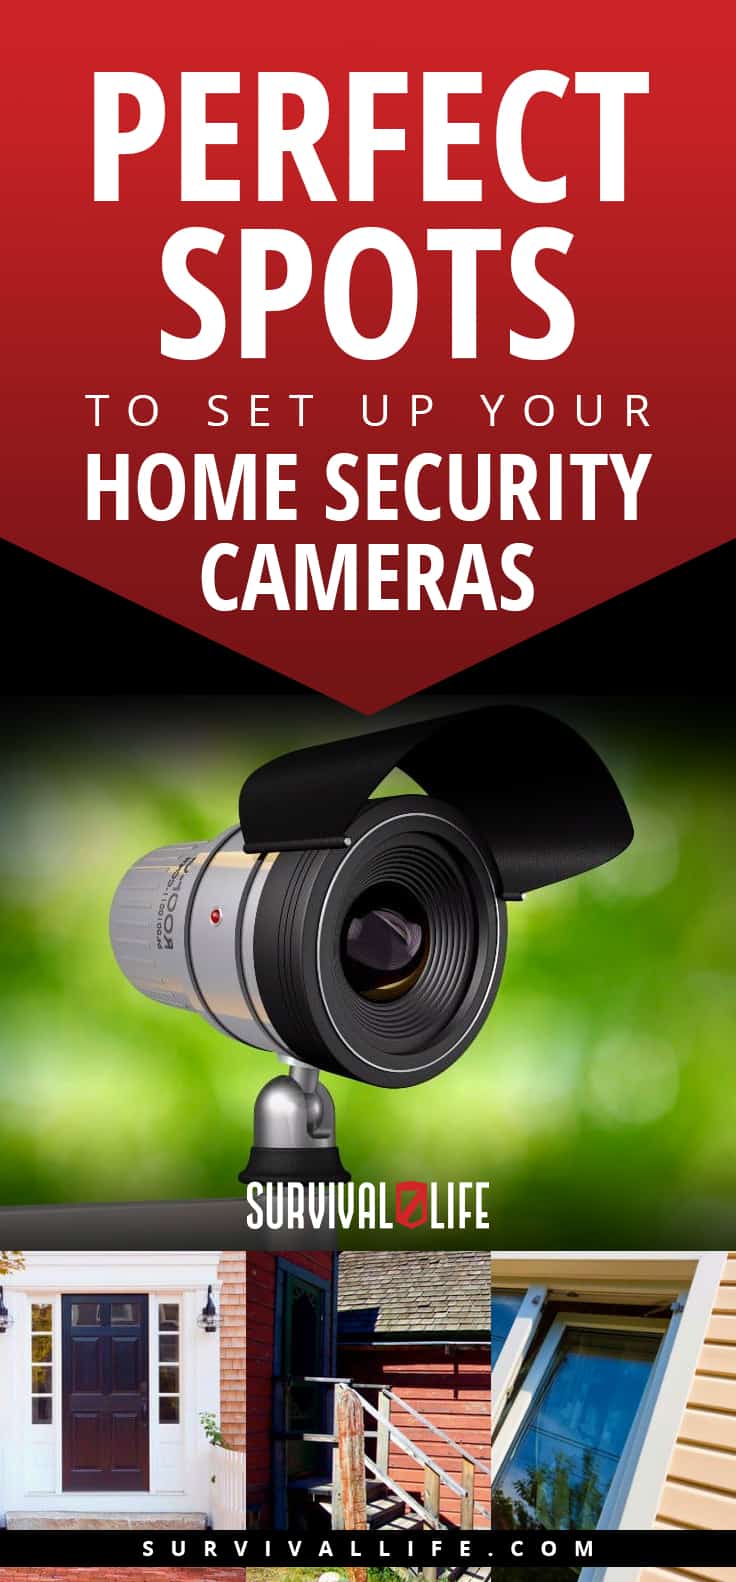 Home Security Cameras | Perfect Spots To Set Up Your Home Security Cameras